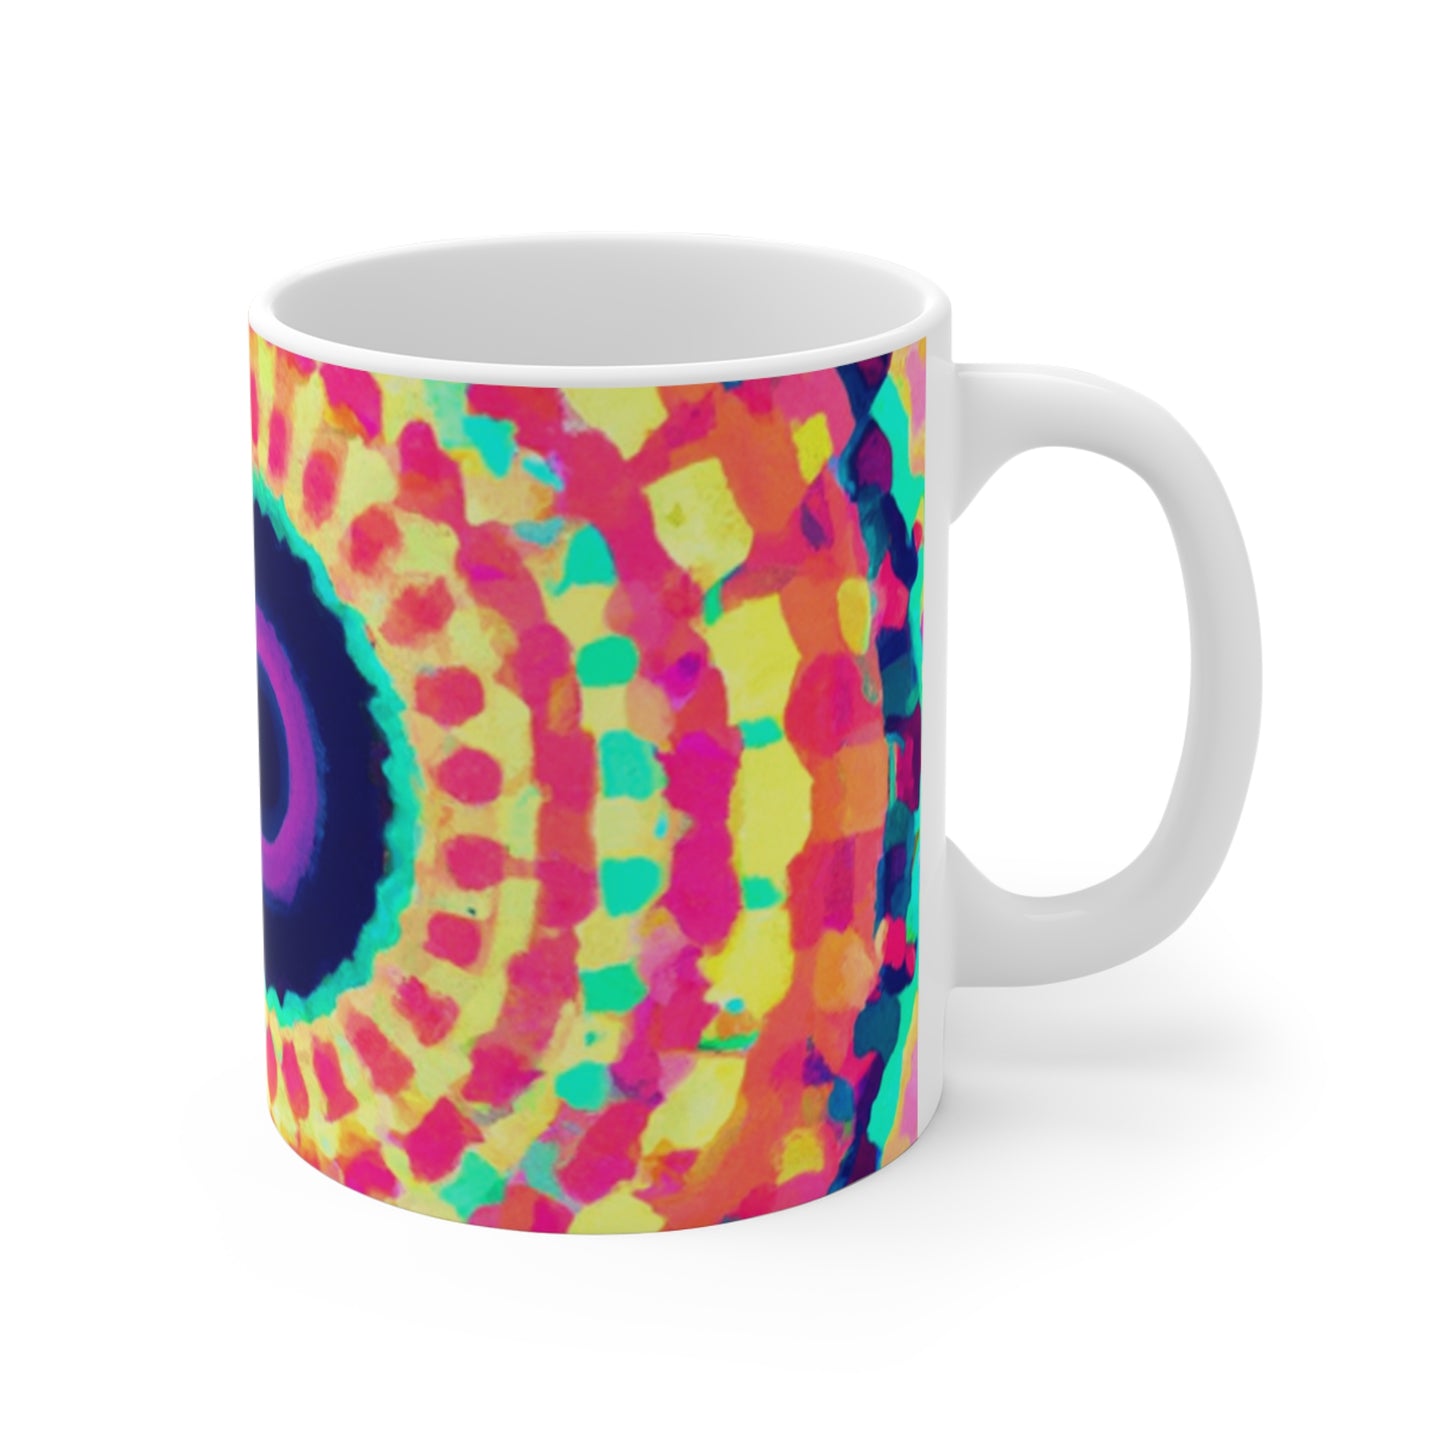 Brewmeister Freddie's Coffee - Psychedelic Coffee Cup Mug 11 Ounce